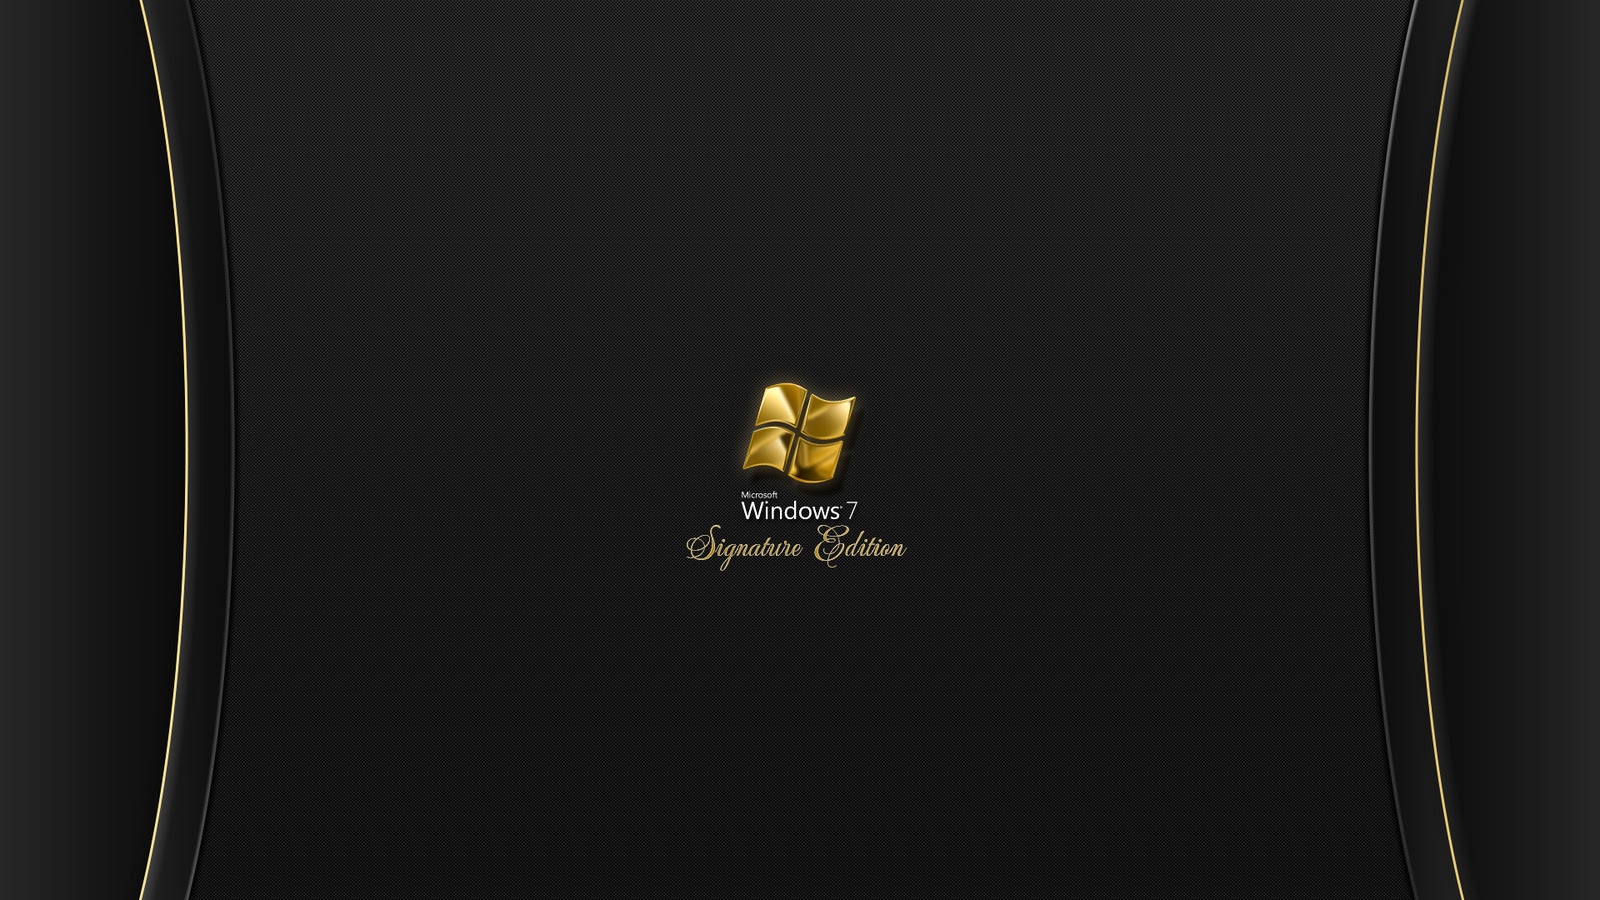 The Best Windows Gold Wallpaper Collection For Your